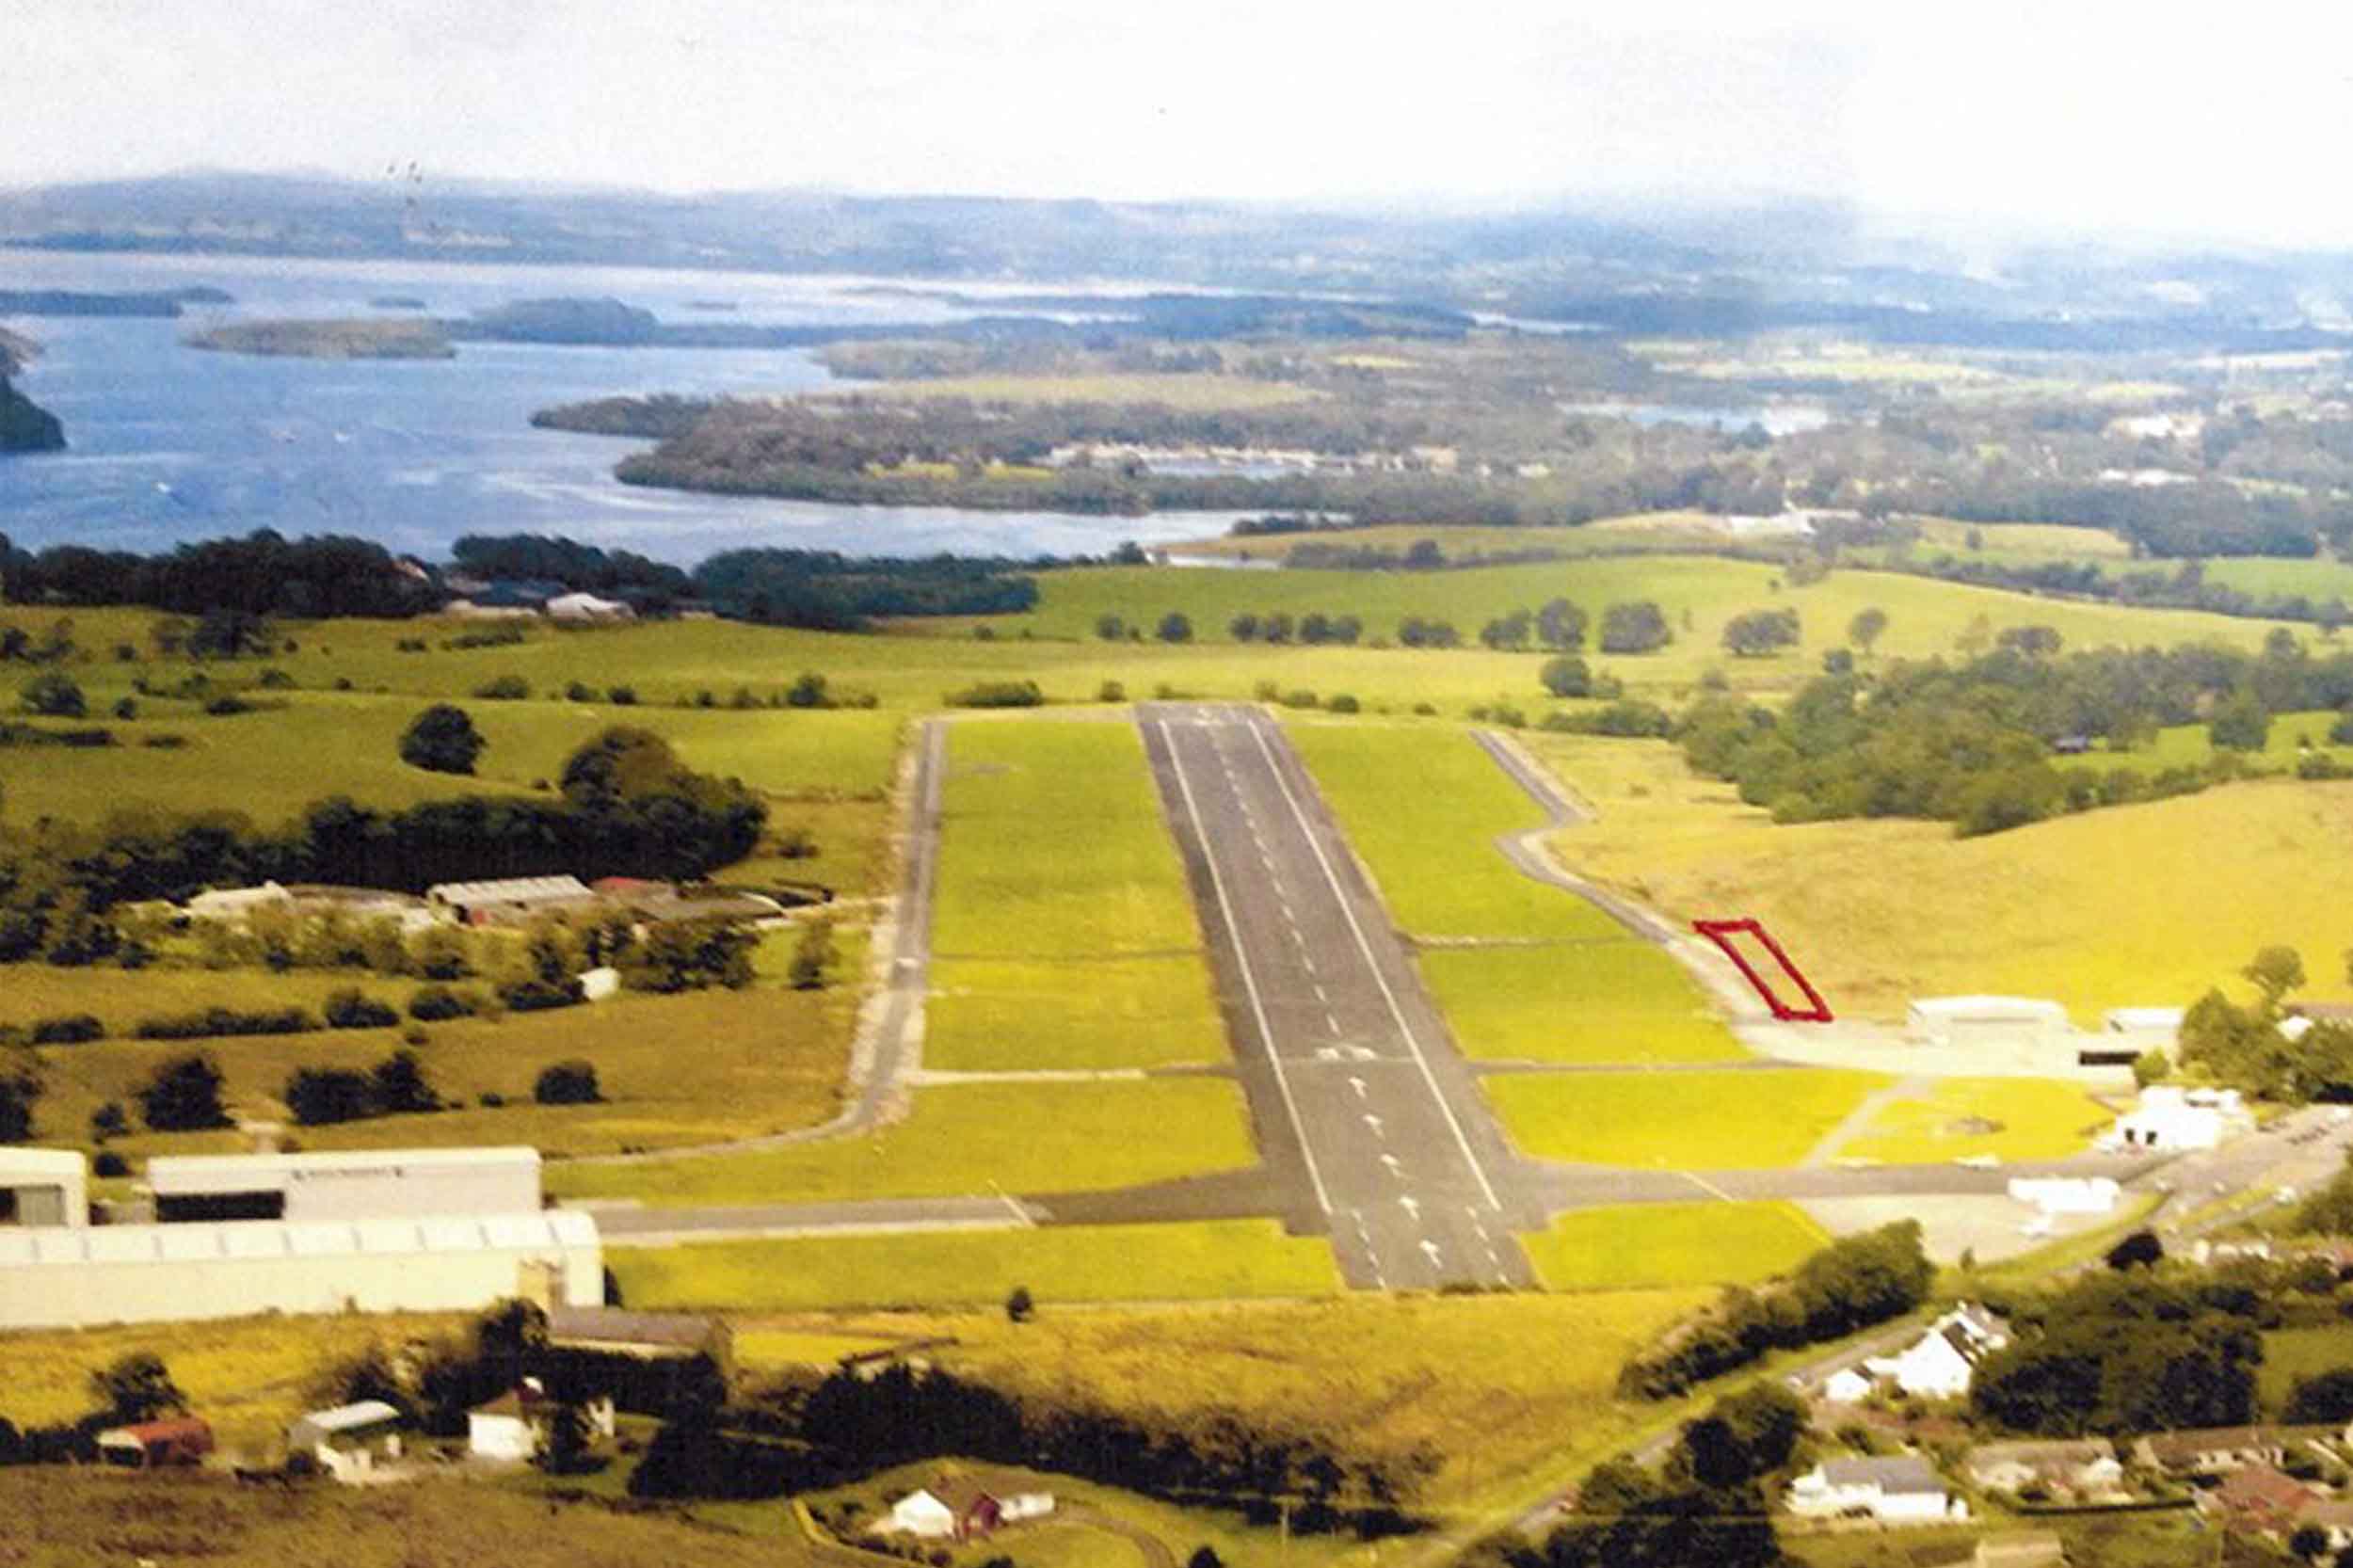 Aeropark at Enniskillen Airport would be located where the red rectangle is shown. Image: Hangar Homes